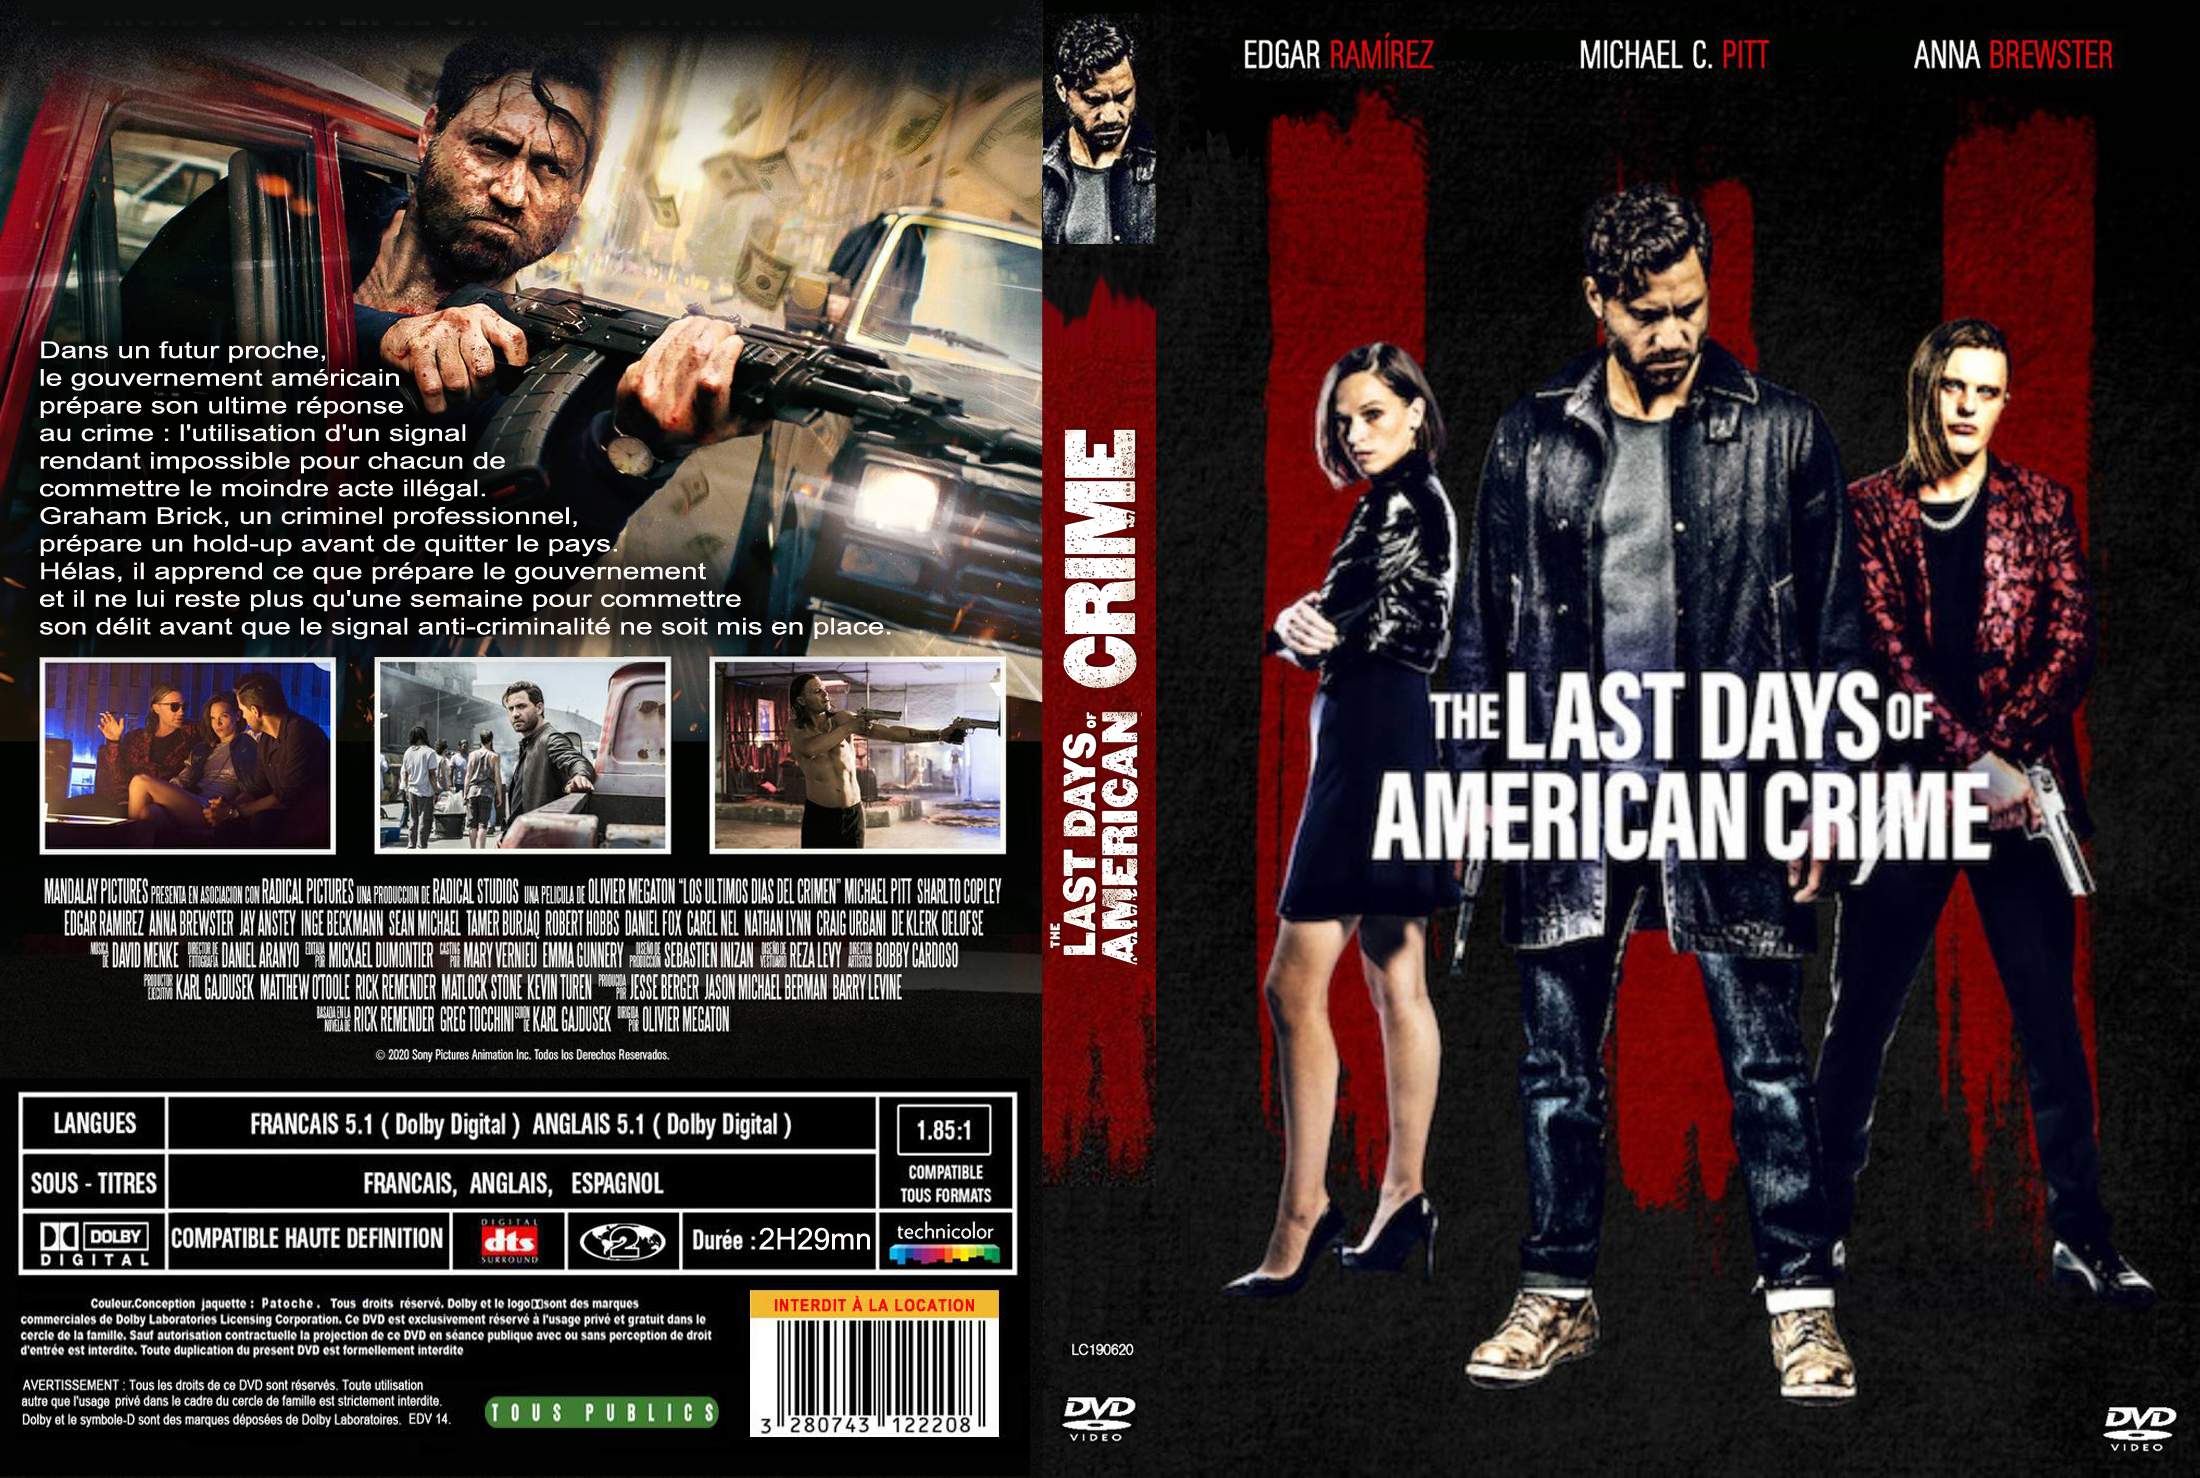 Jaquette DVD The last days of american crime custom